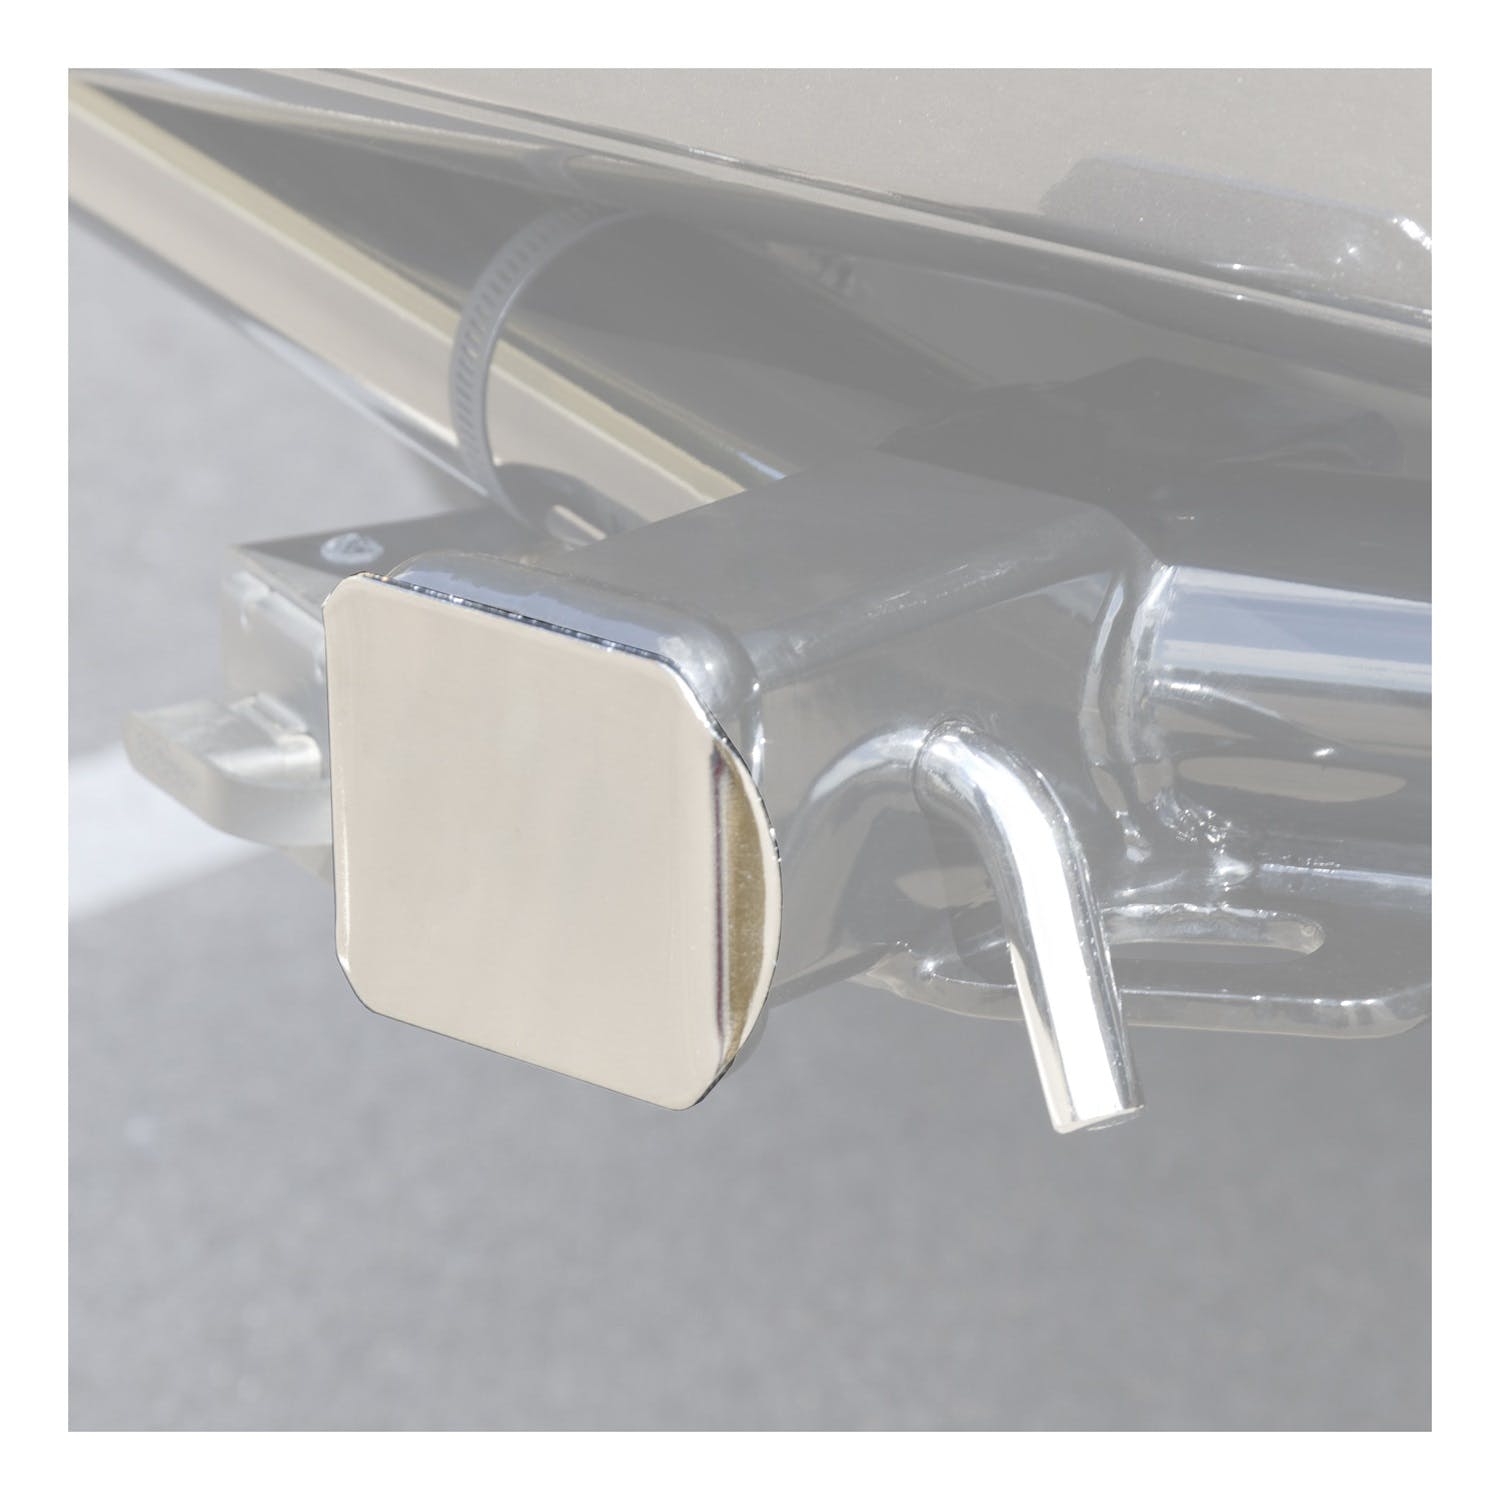 CURT 22171 2 Chrome Plastic Hitch Tube Cover (Packaged)